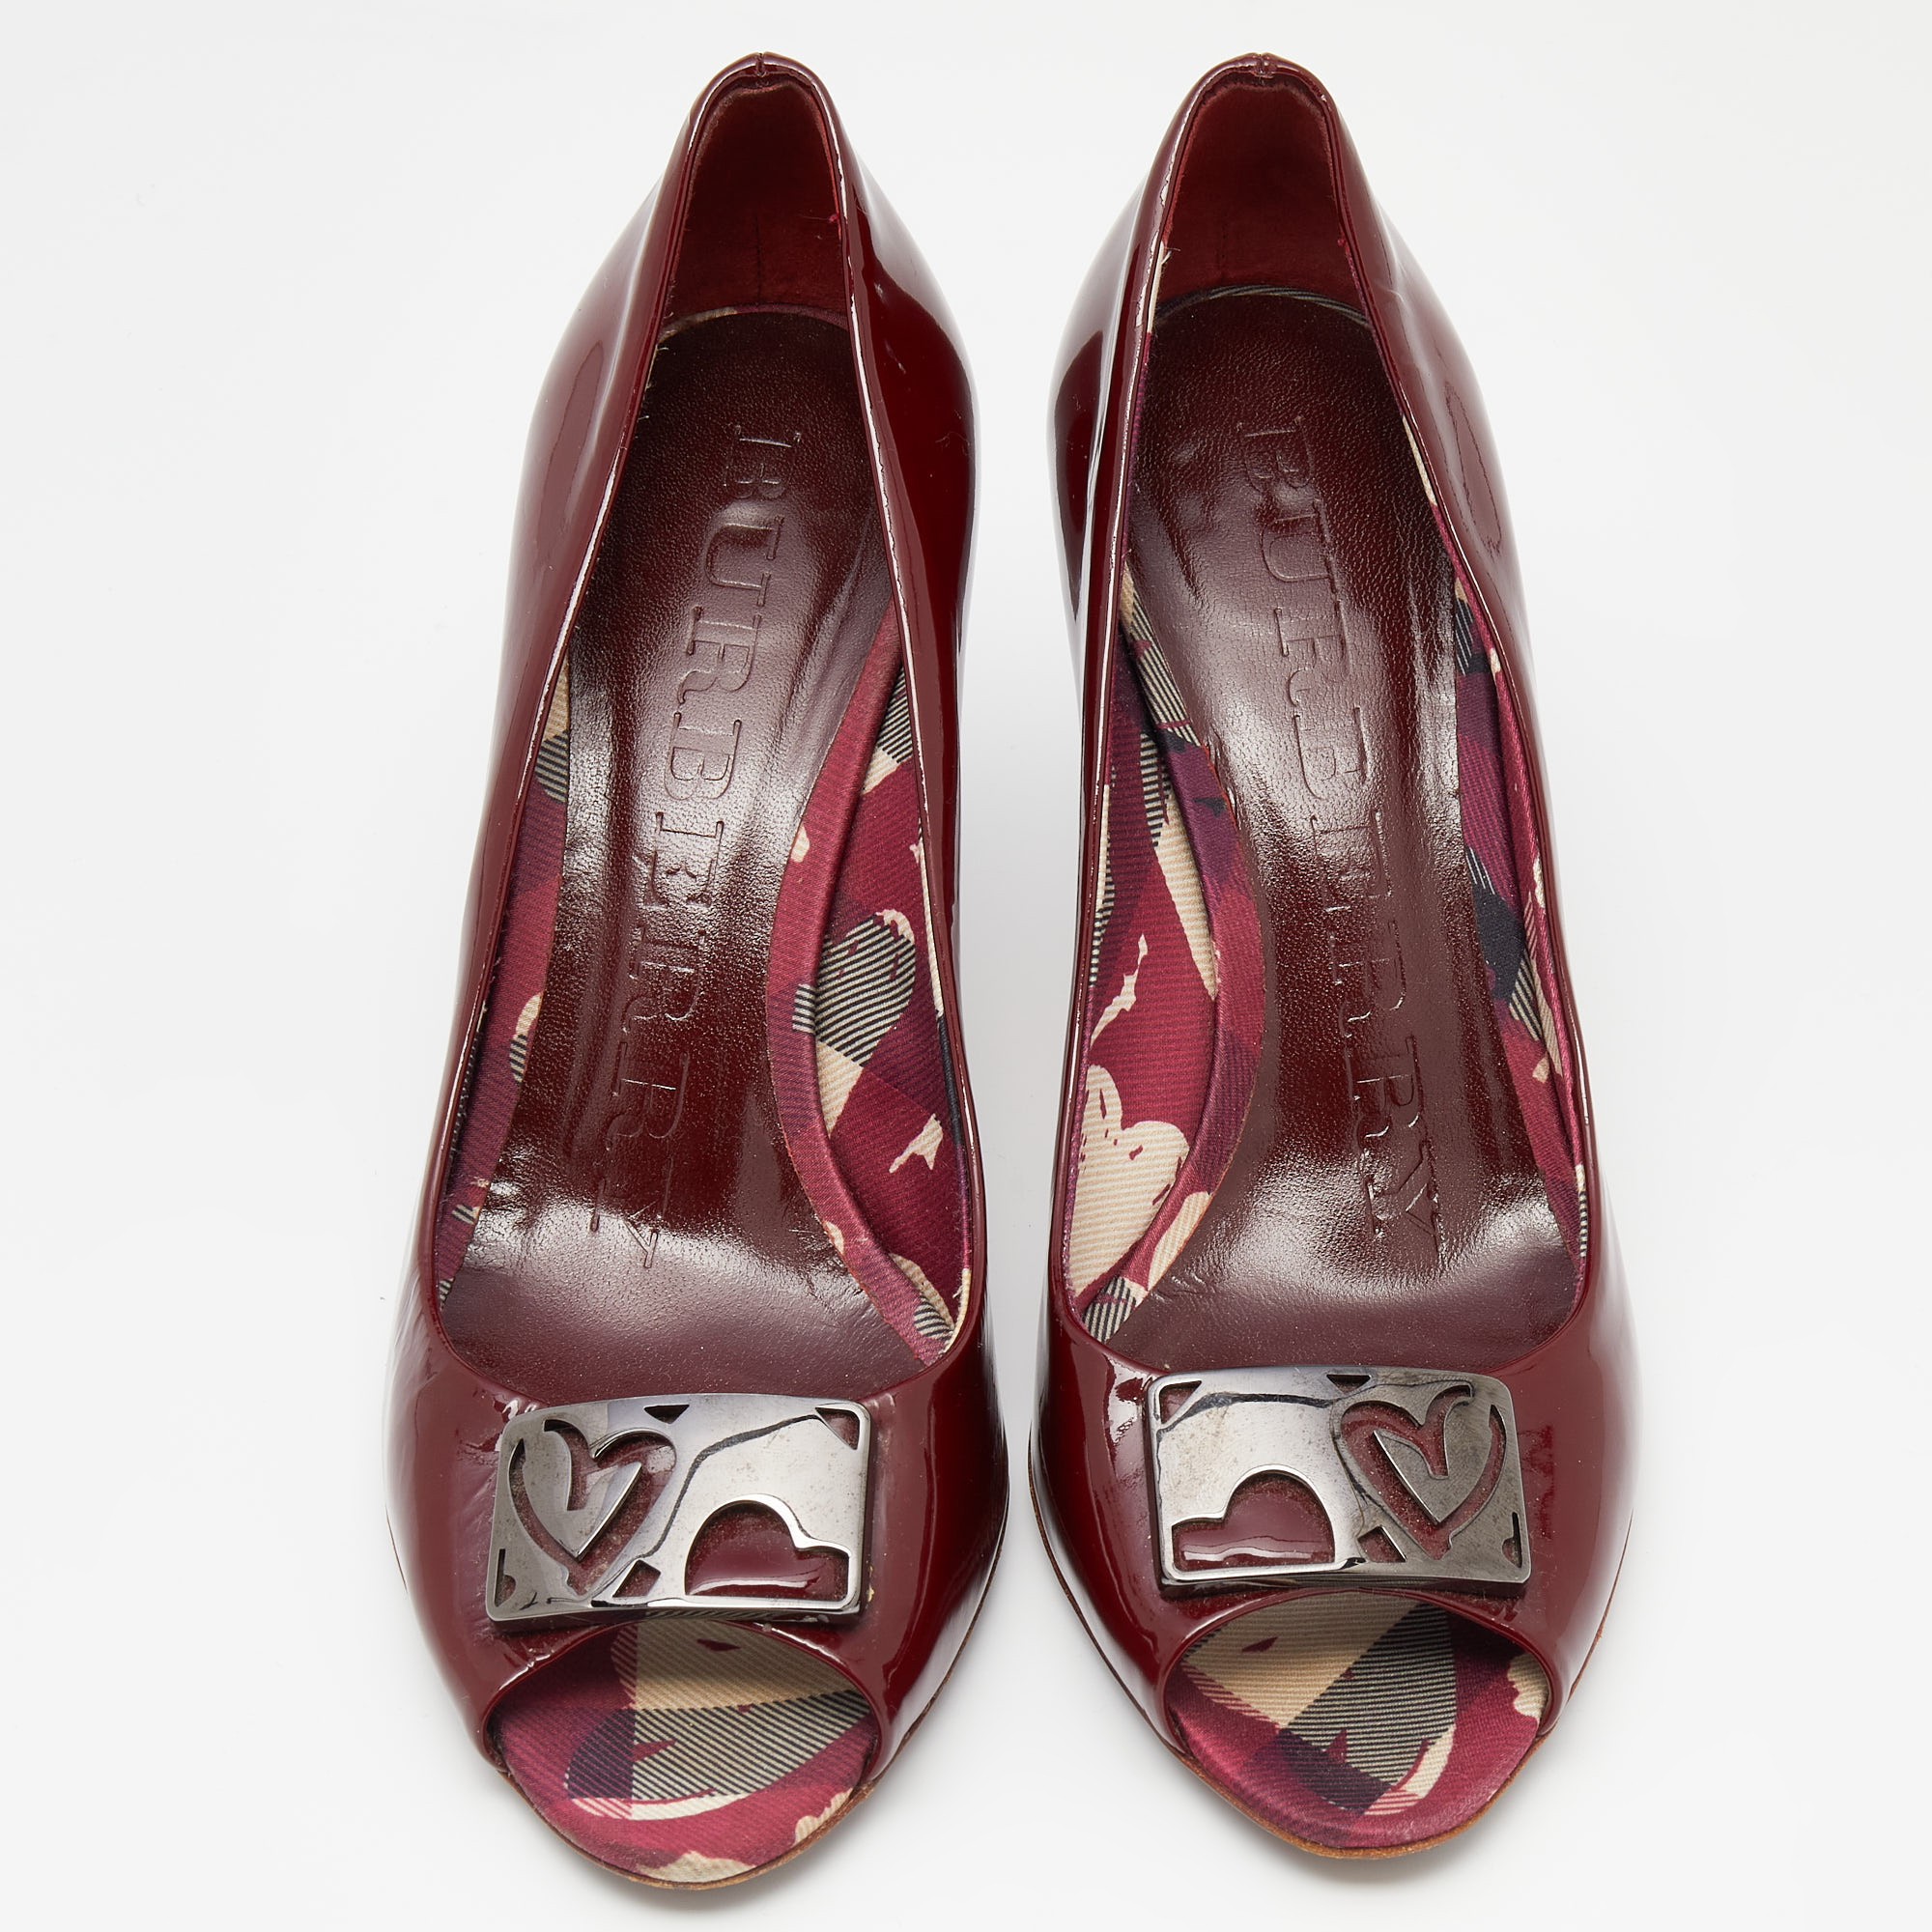 Burberry Burgundy Patent Leather Peep Toe Pumps Size 38